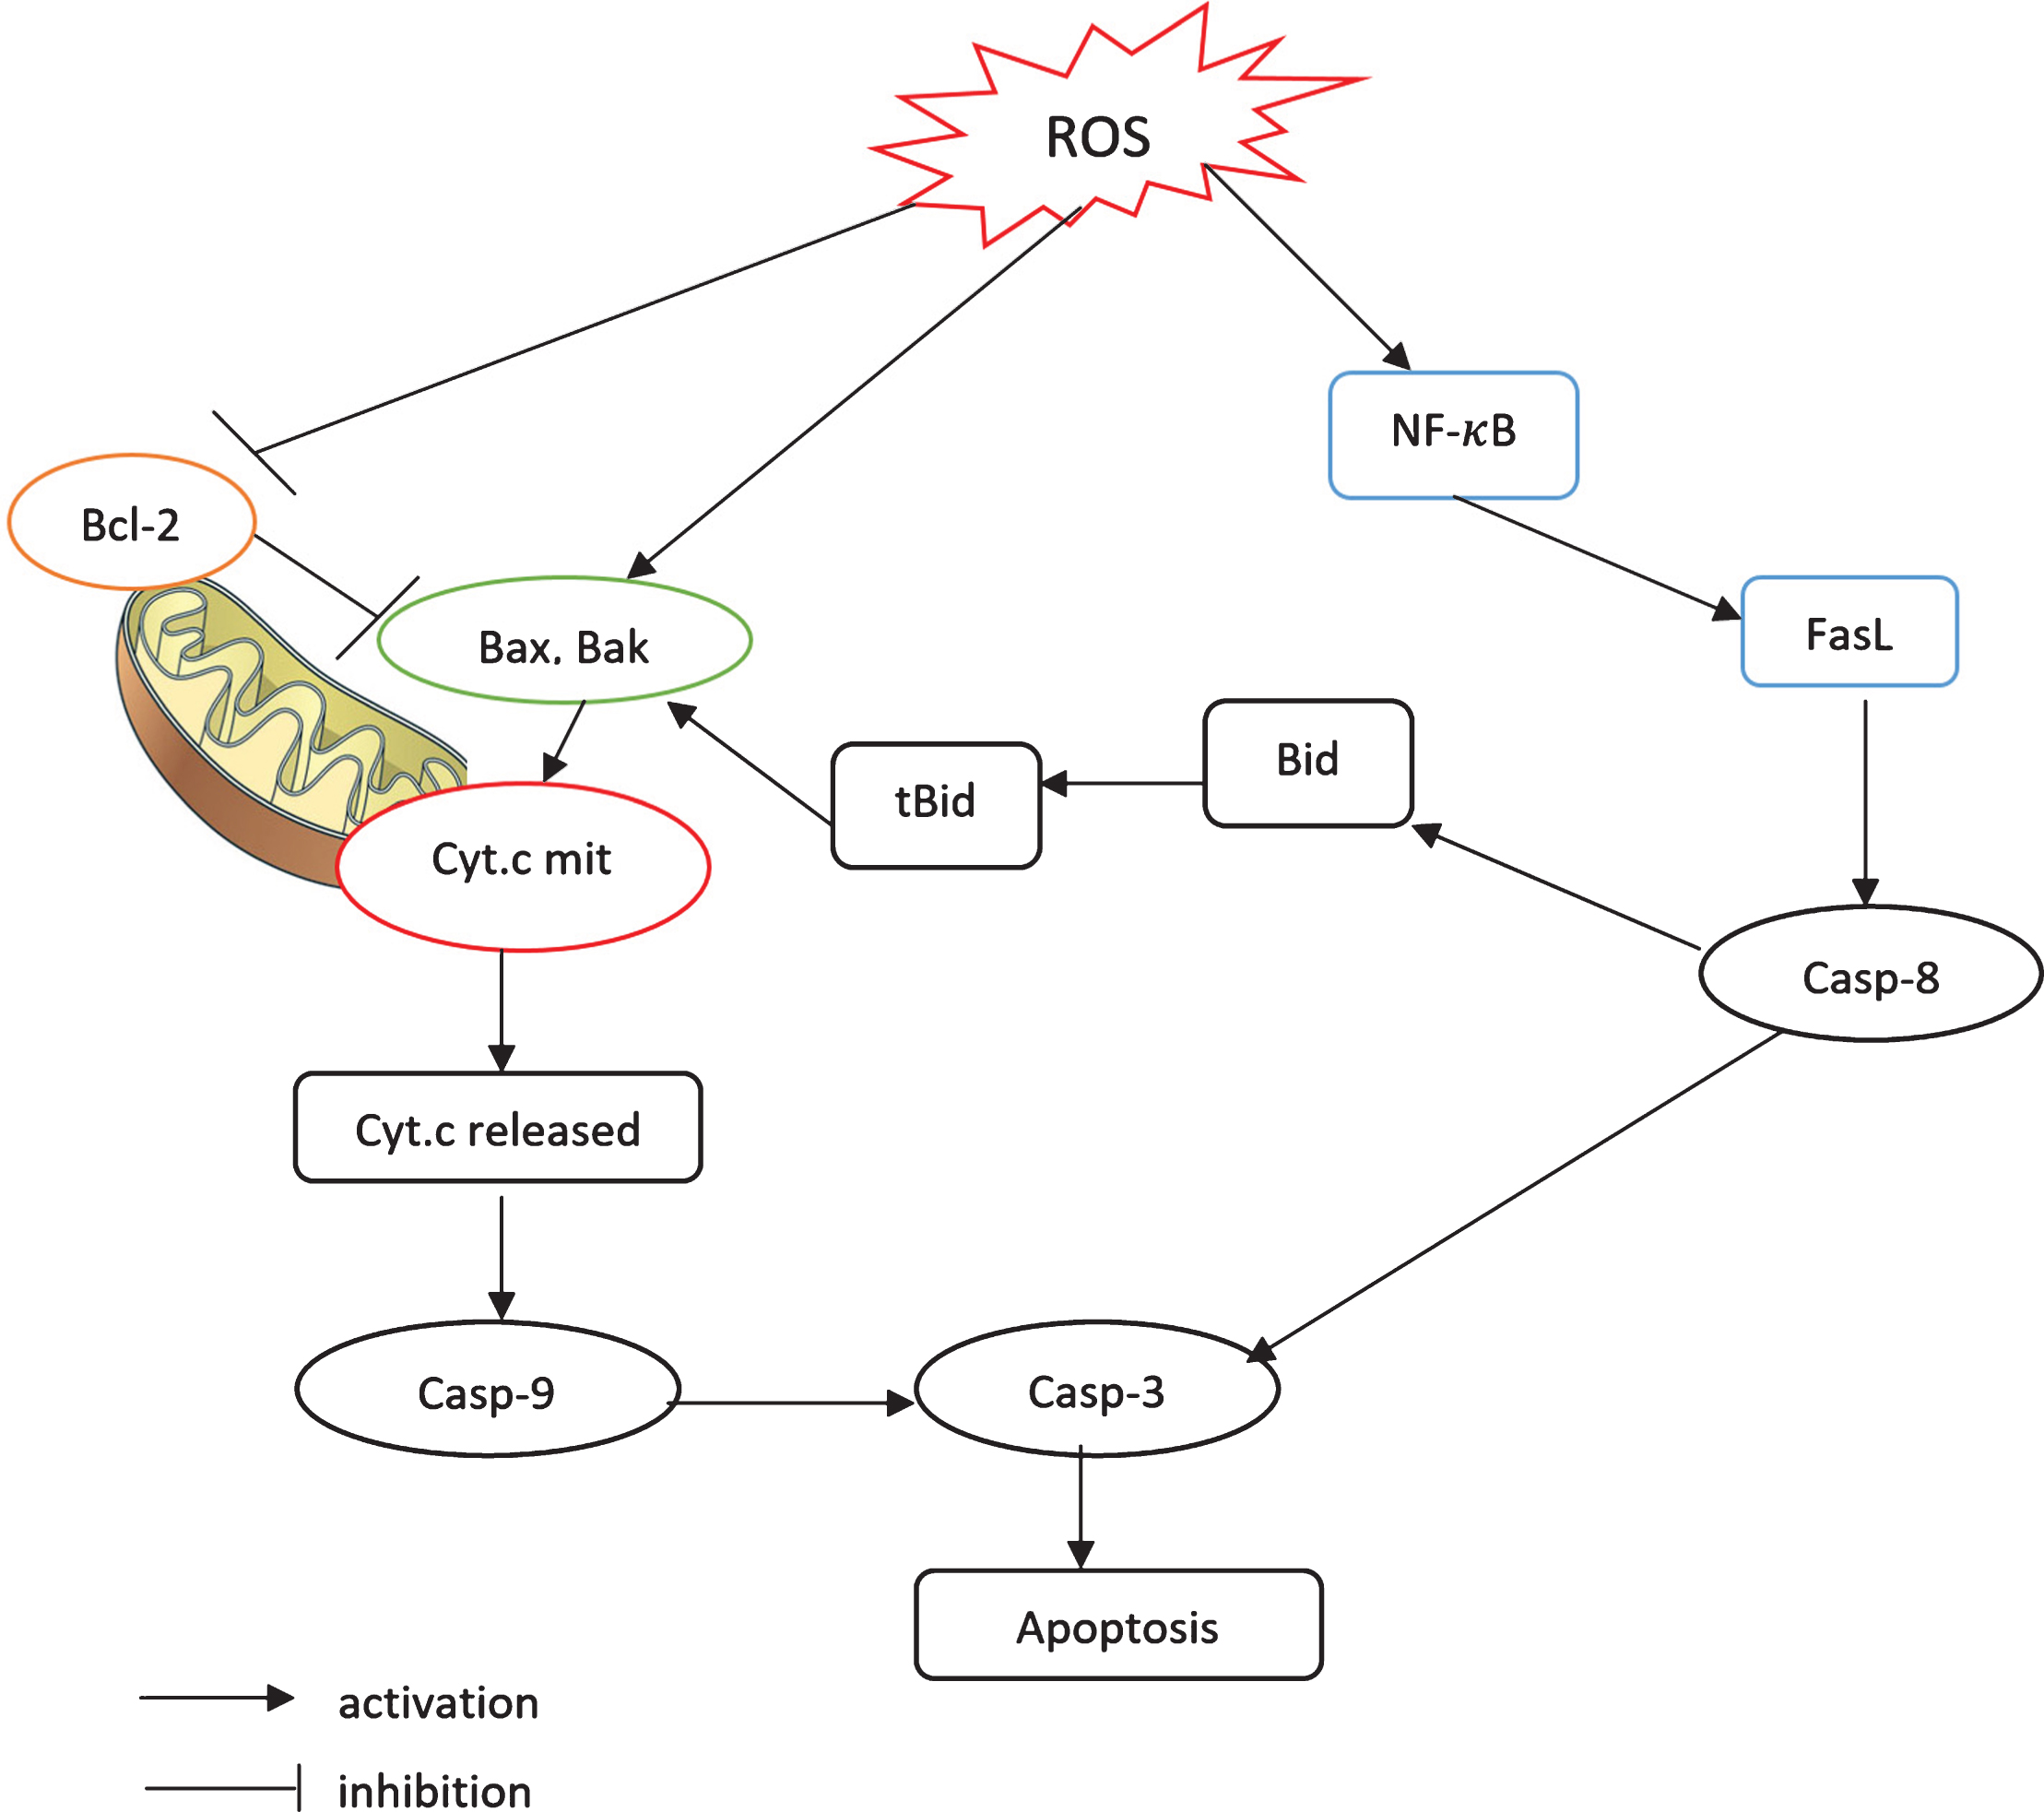 A schematic model of the apoptosis signaling pathways. 1) The mitochondrial pathway and 2) the FasL-dependent pathway mediated by NF-κB. Each pathway activates its own initiator caspase (caspase 8 and 9) which in turn will activate the executioner caspase 3.